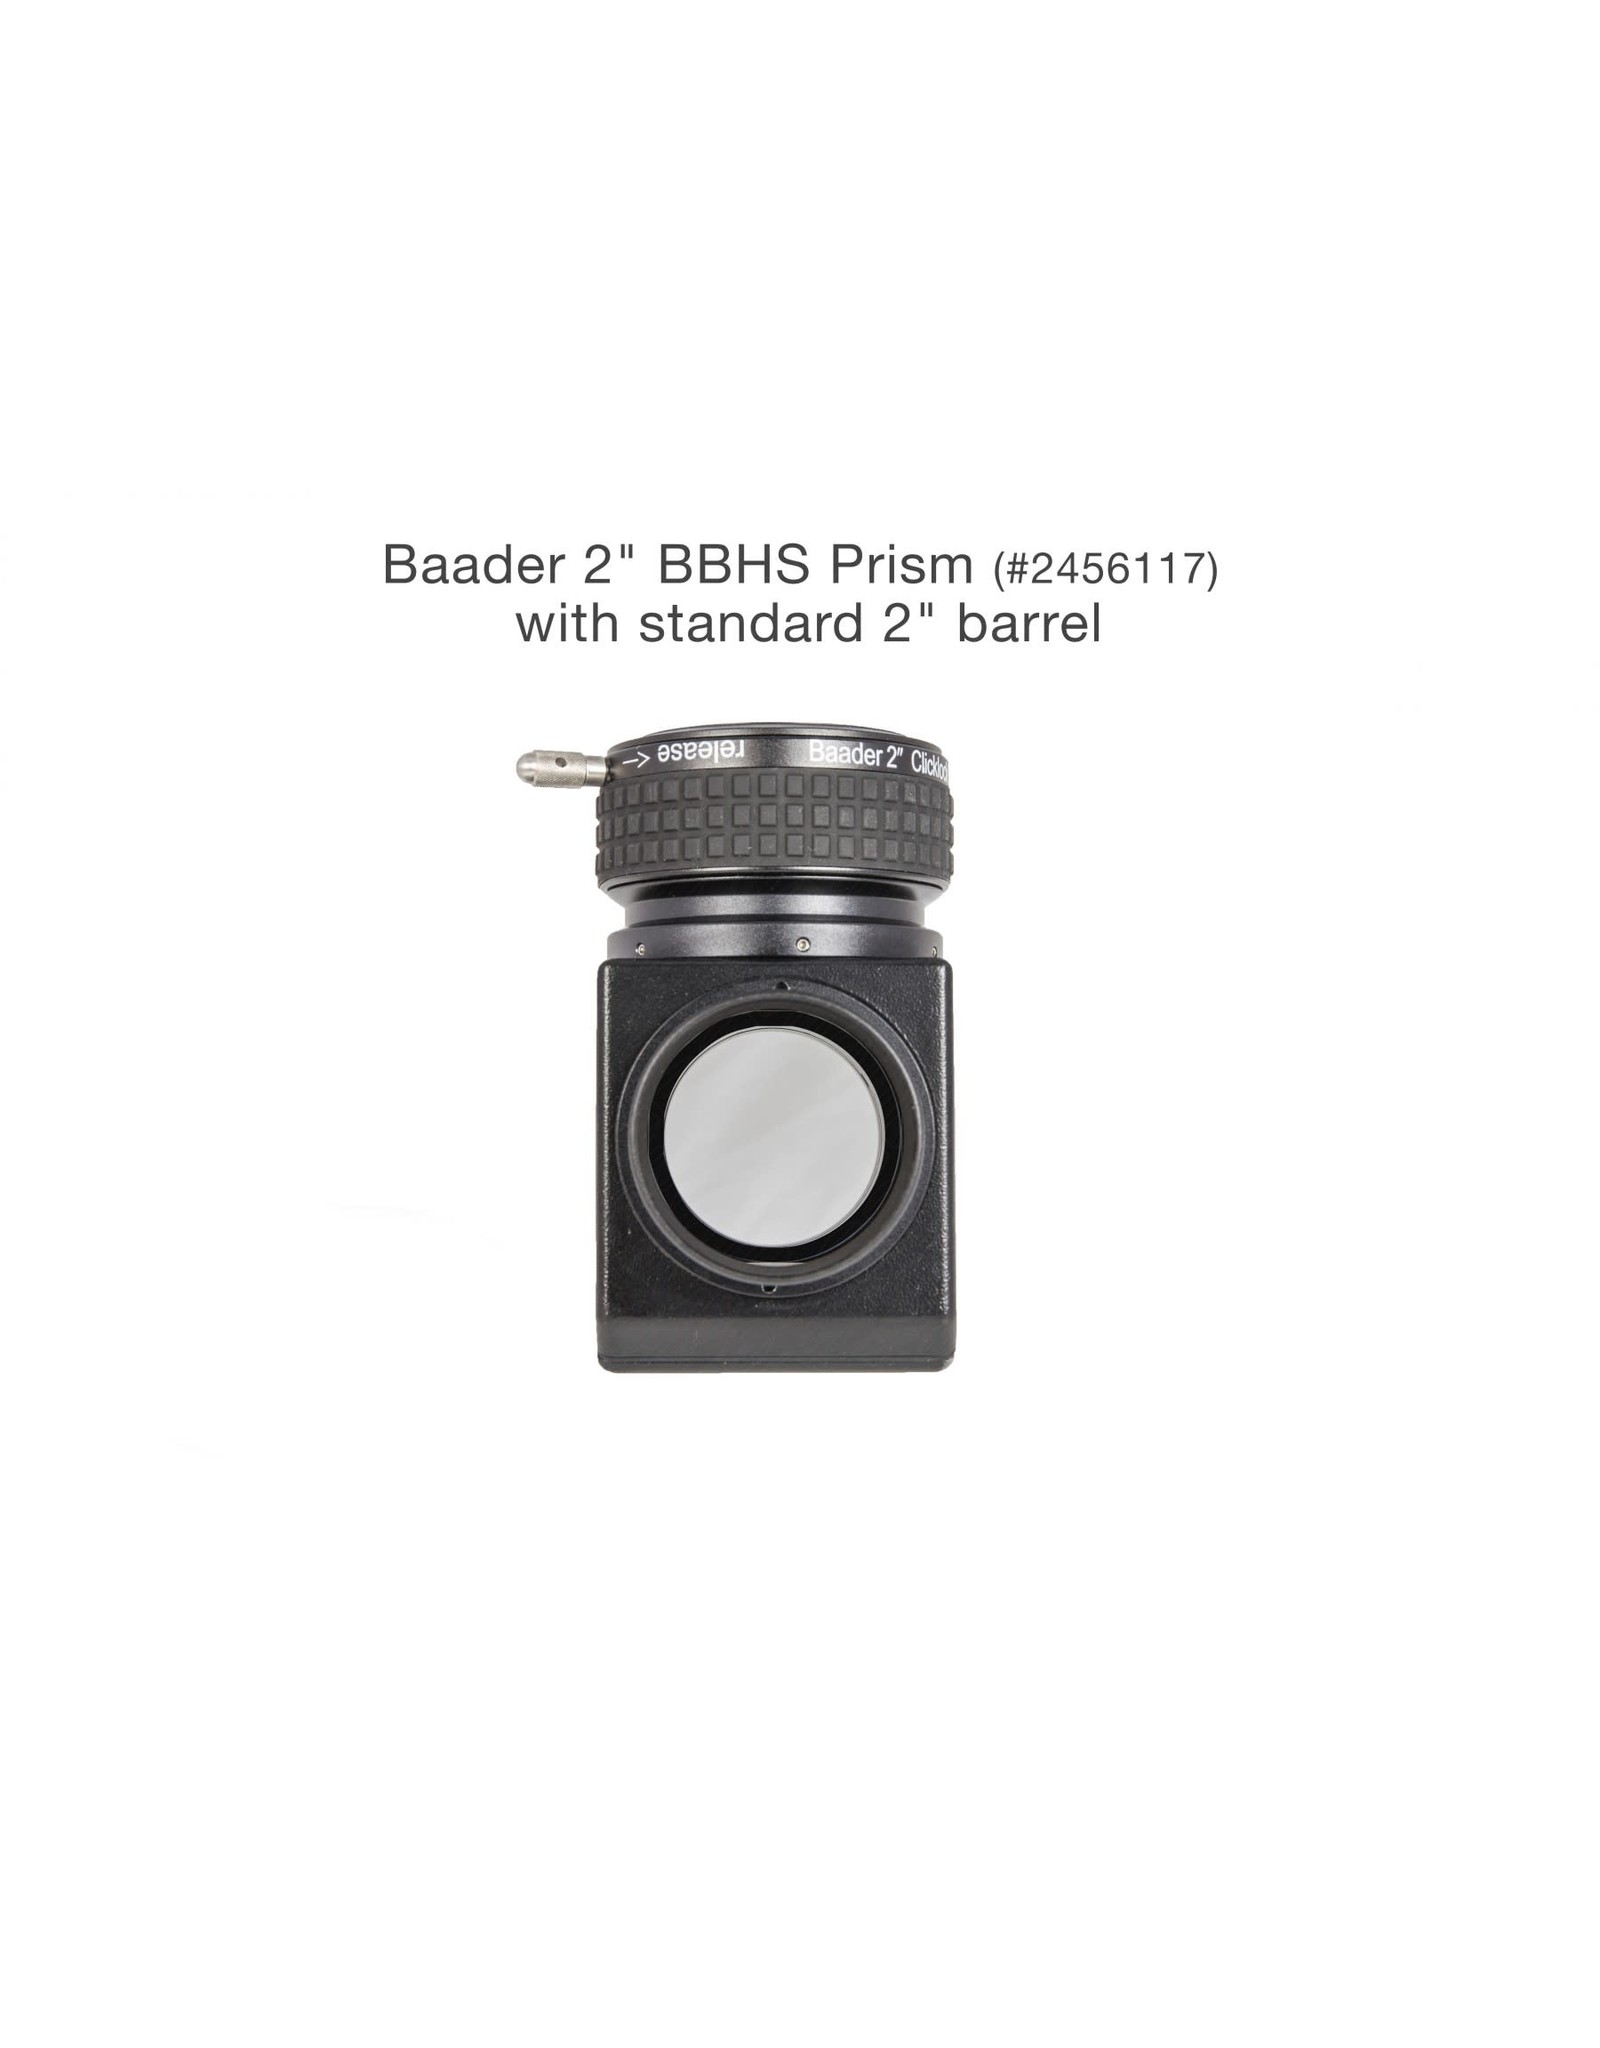 Baader Planetarium Baader Planetarium 2" Zeiss Prism Star Diagonal with BBHS Coatings & 2" ClickLock Eyepiece Clamp - PRISM-2Z